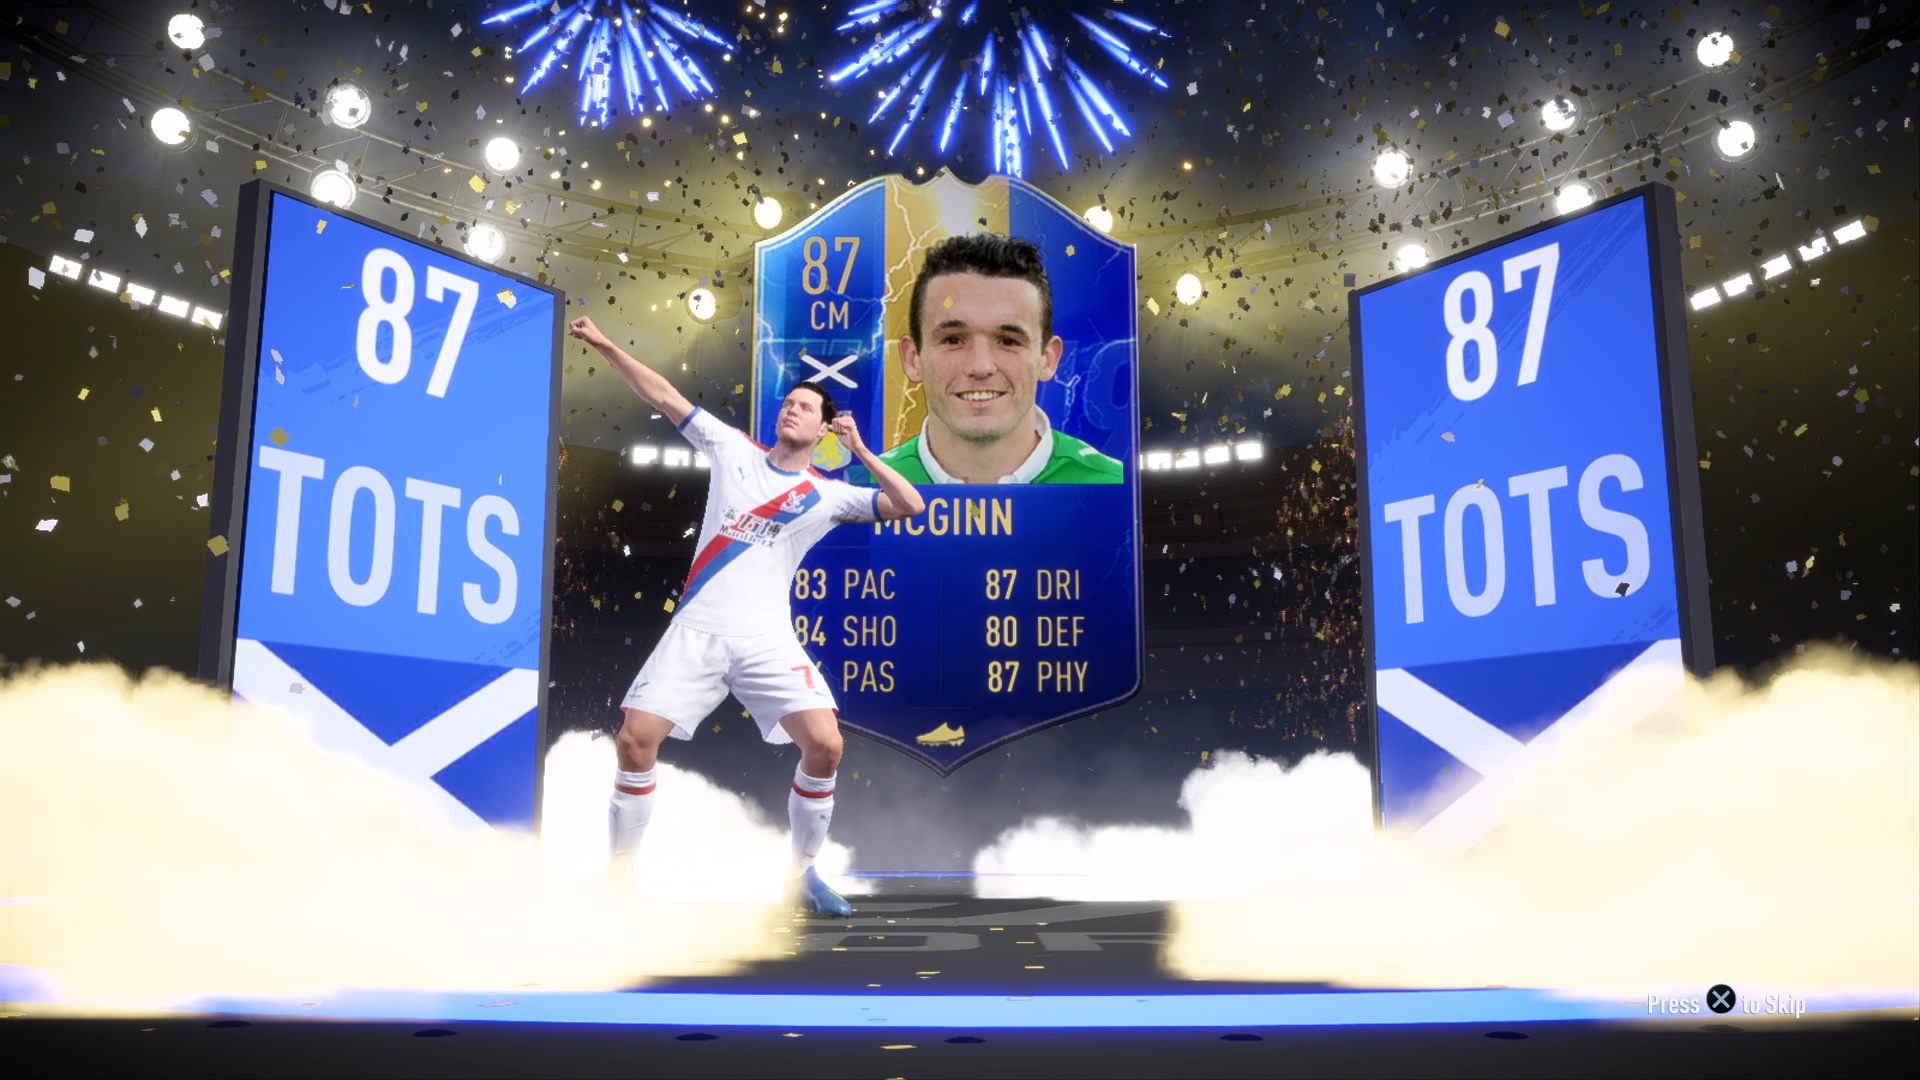 19 TOTS (Team Of The Season) guide: the cards you can buy for under 100,000 coins | GamesRadar+